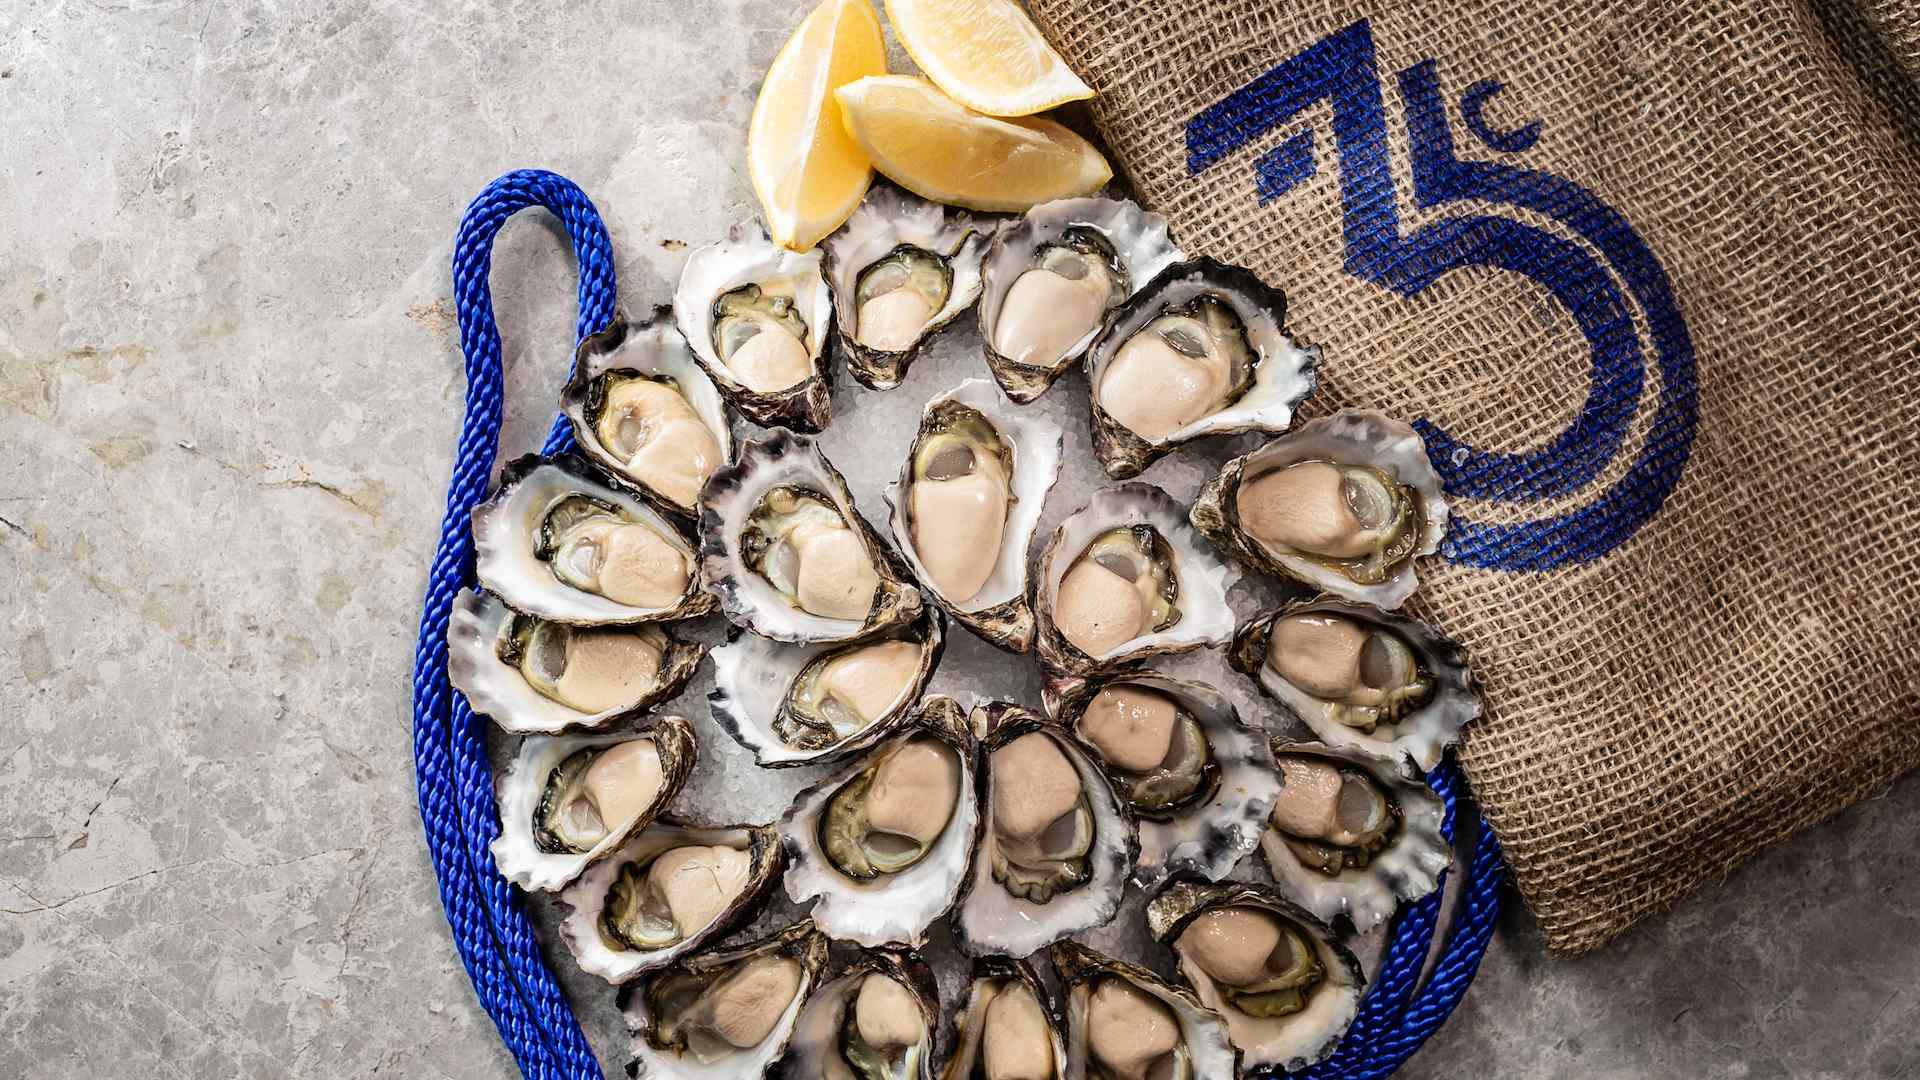 East 33 Is Sydney's New Home-Delivery Service Dropping A-Class Oysters to Your Doorstep